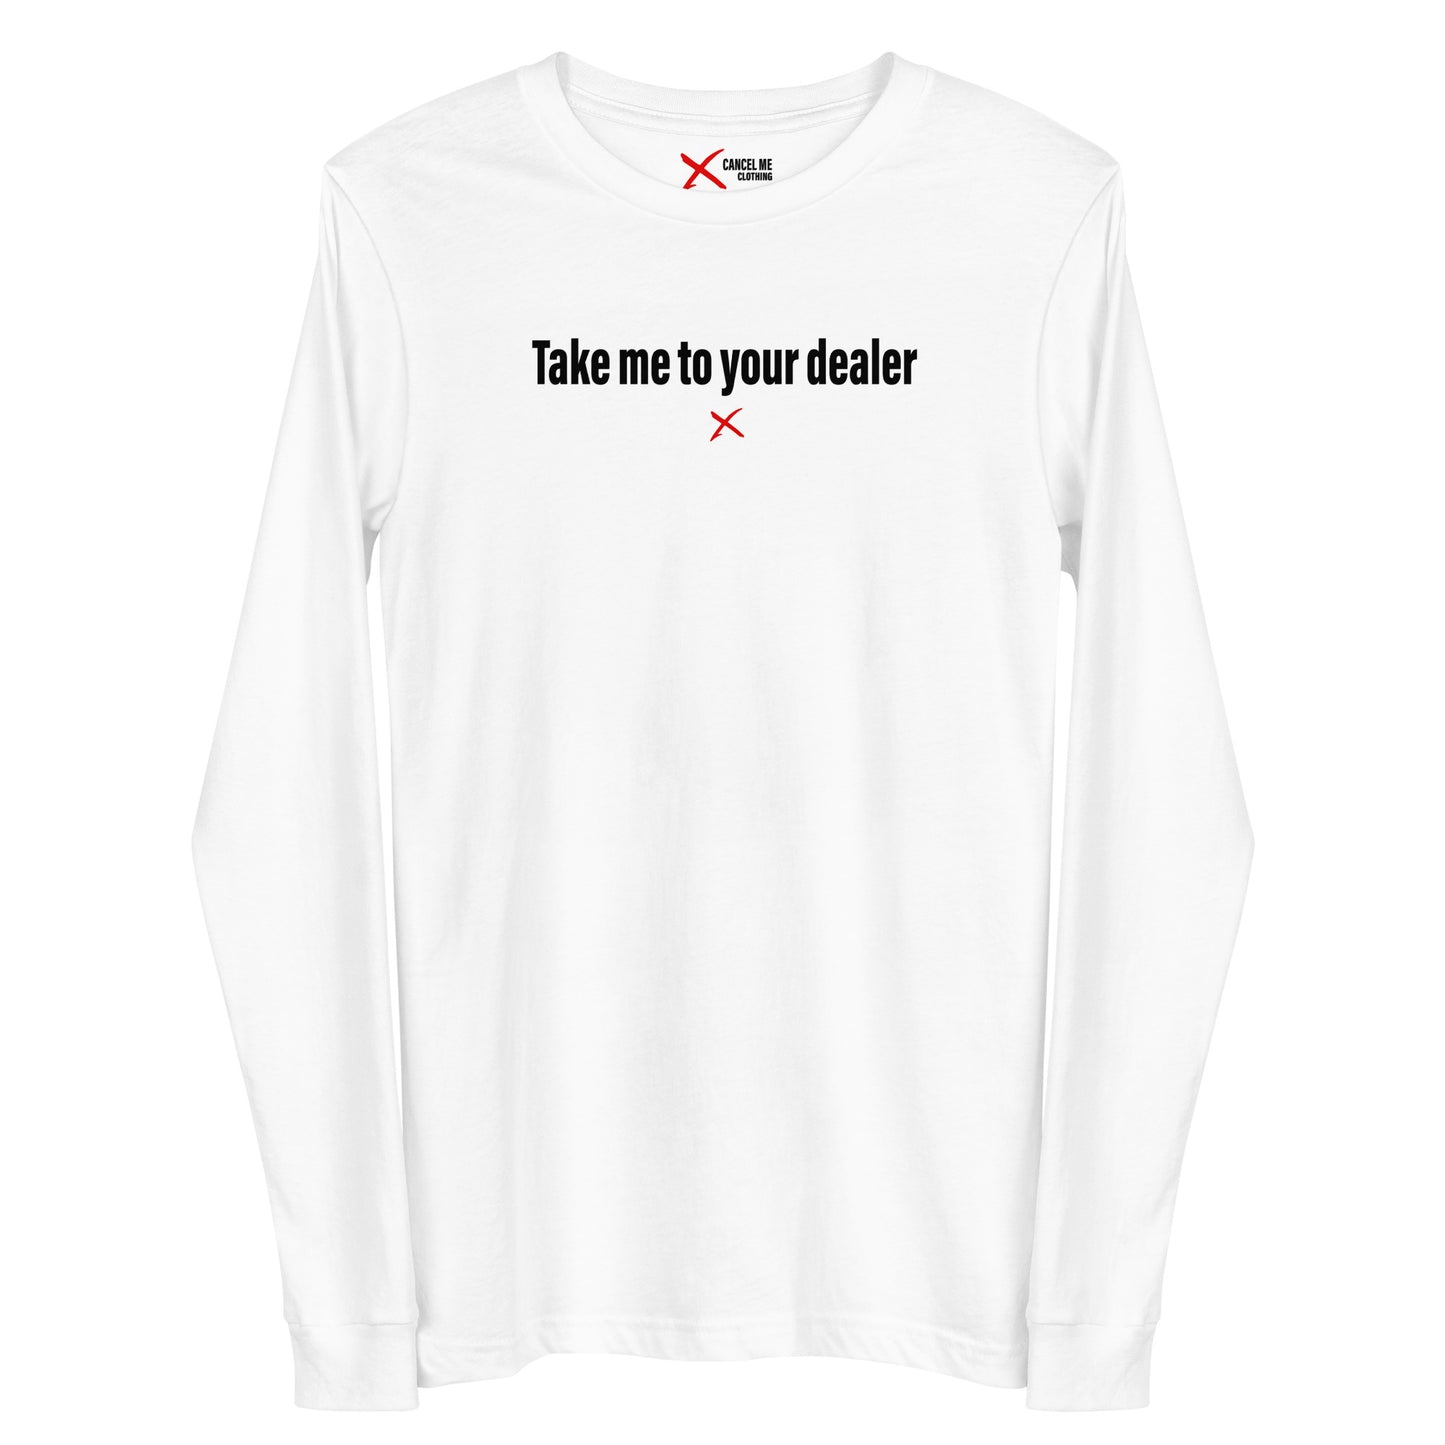 Take me to your dealer - Longsleeve